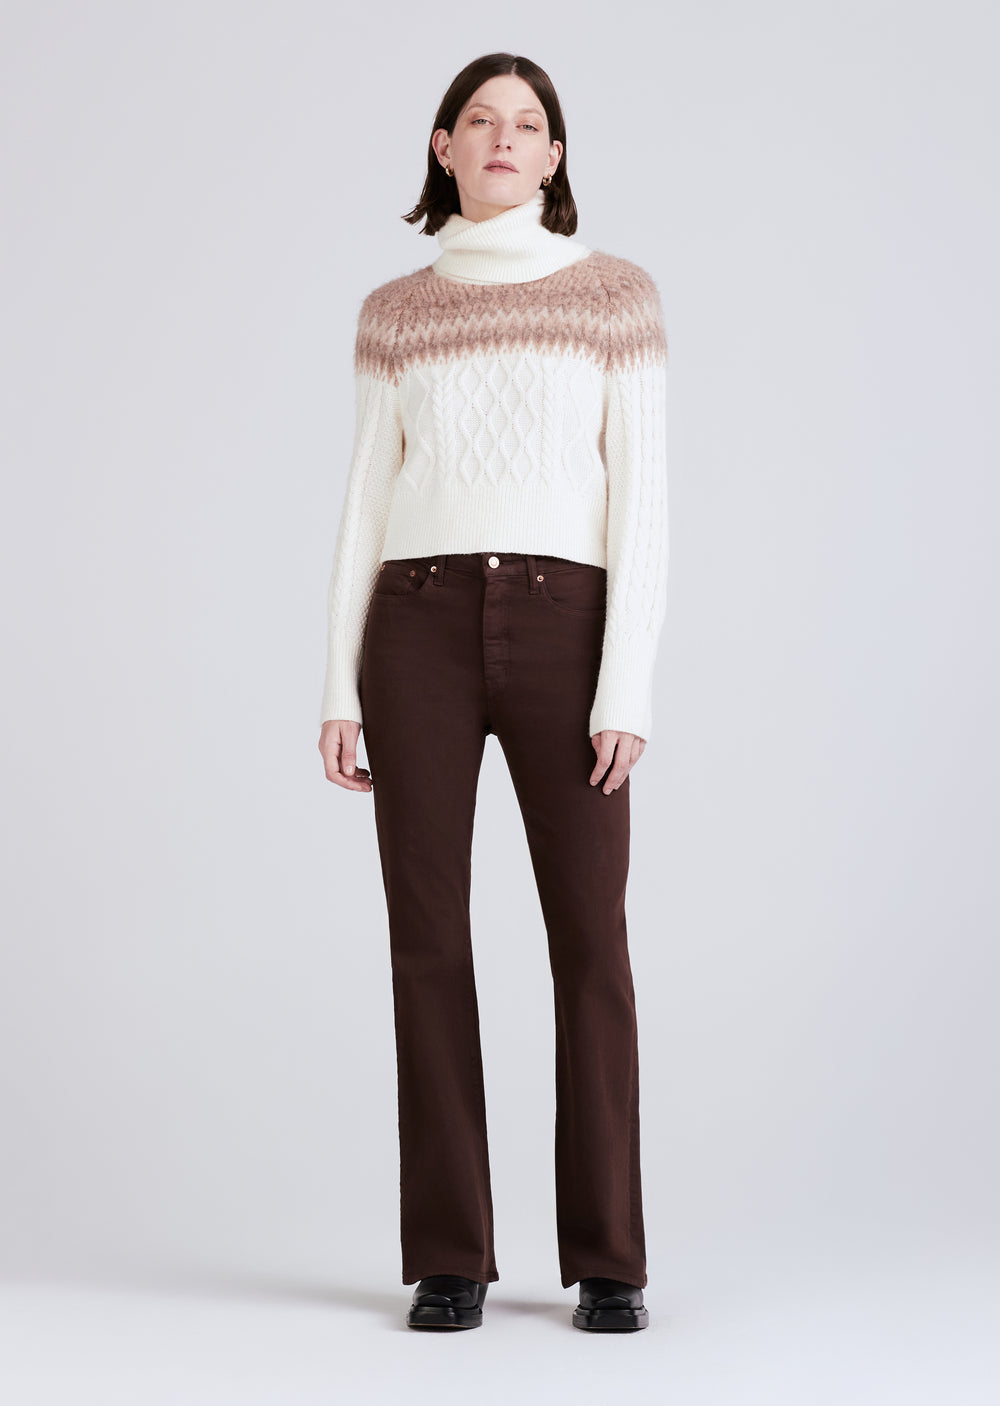 Derek Lam - Women - Ivory Marcella Cable Knit and Fair Isle Turtleneck